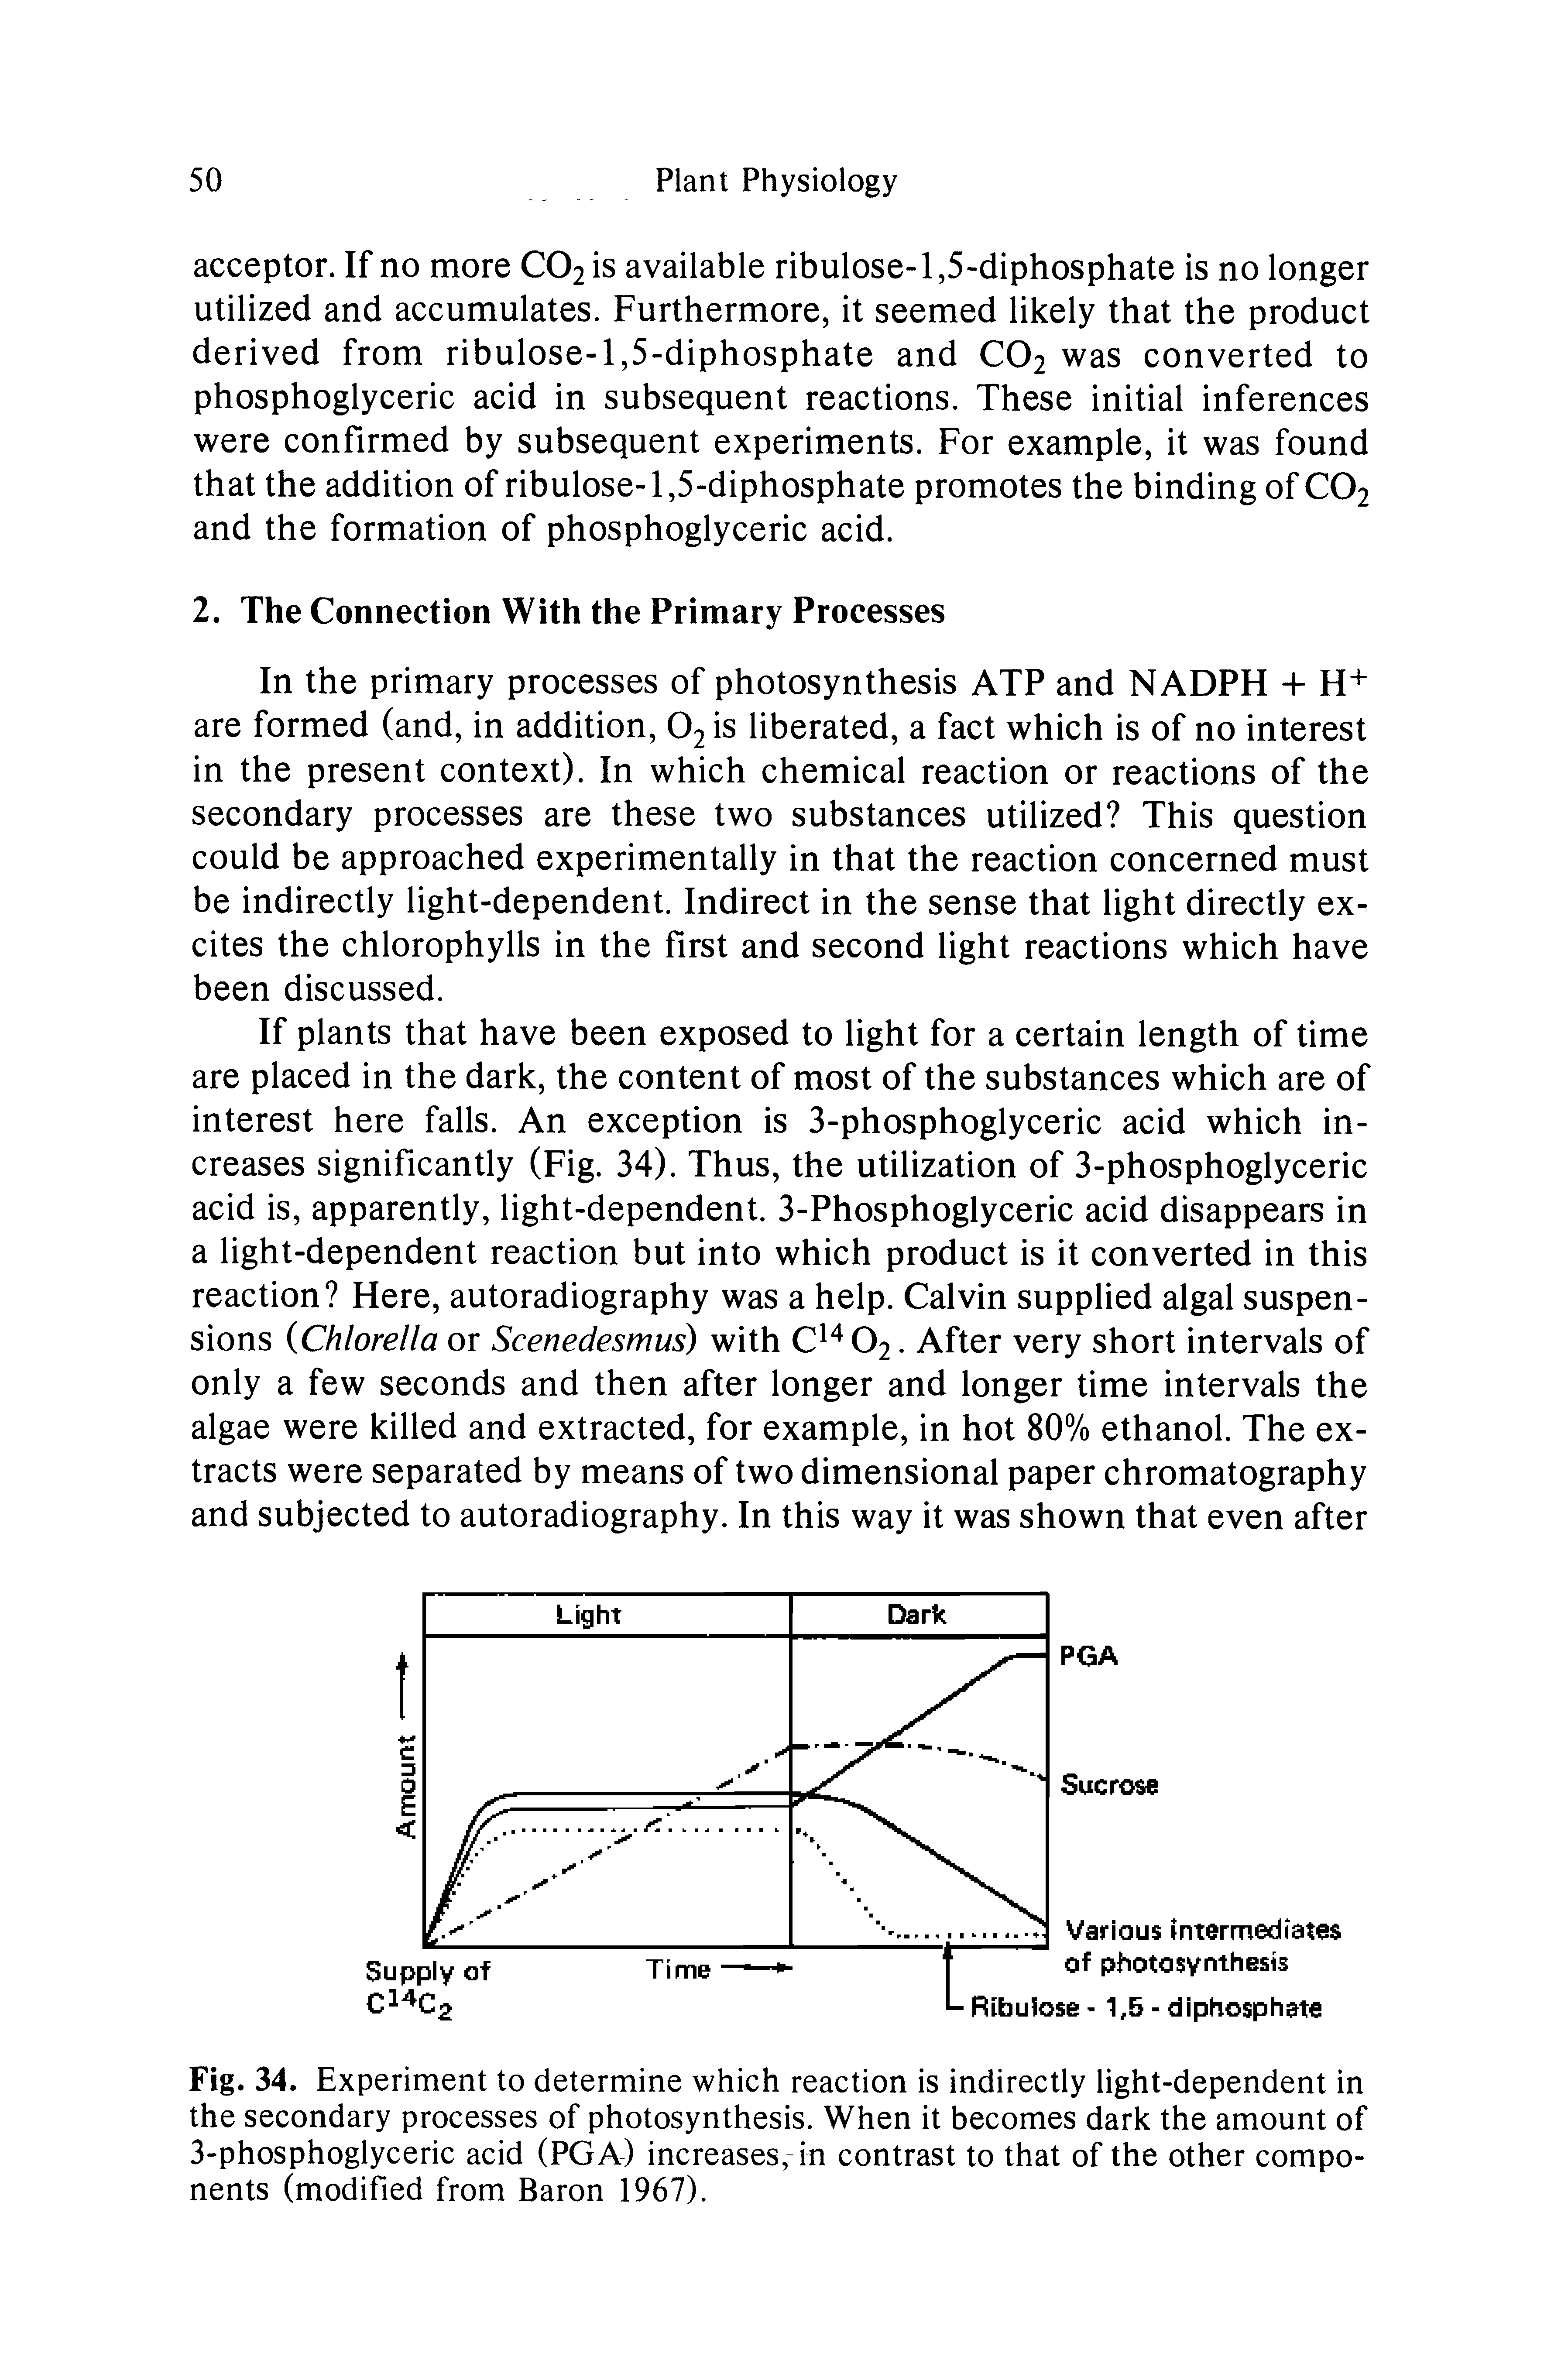 Fig. 34. Experiment to determine which reaction is indirectly light-dependent in the secondary processes of photosynthesis. When it becomes dark the amount of 3-phosphoglyceric acid (PGA) increases, in contrast to that of the other components (modified from Baron 1967).